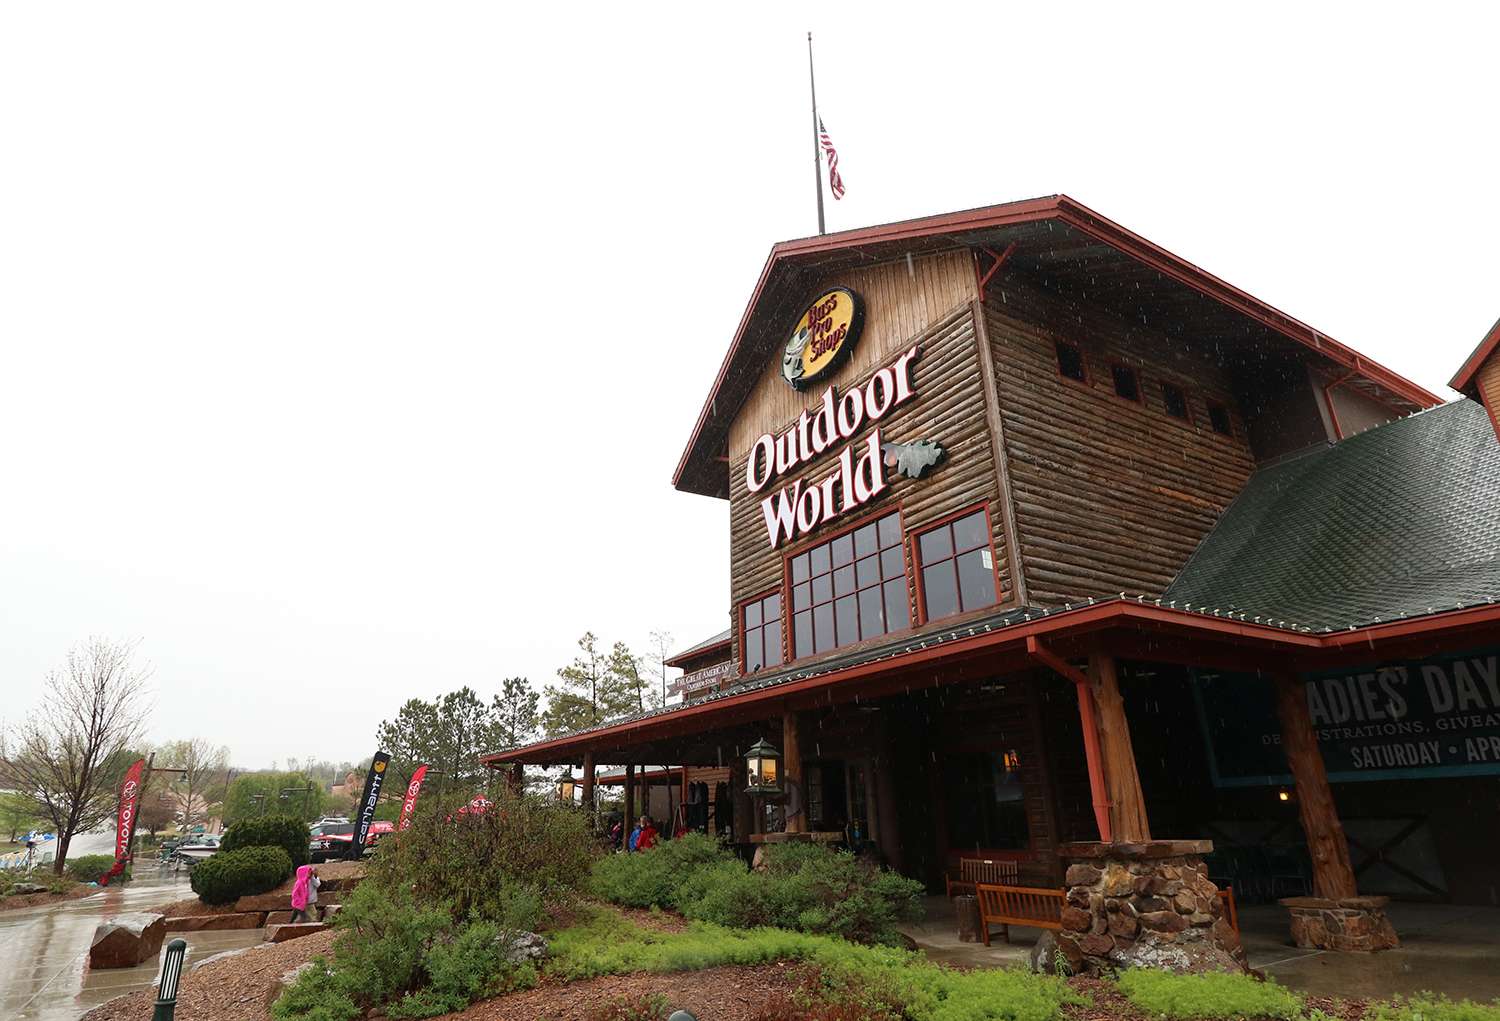 Bass Pro Shops in Broken Arrow, Okla., hosted the championship weigh-in.